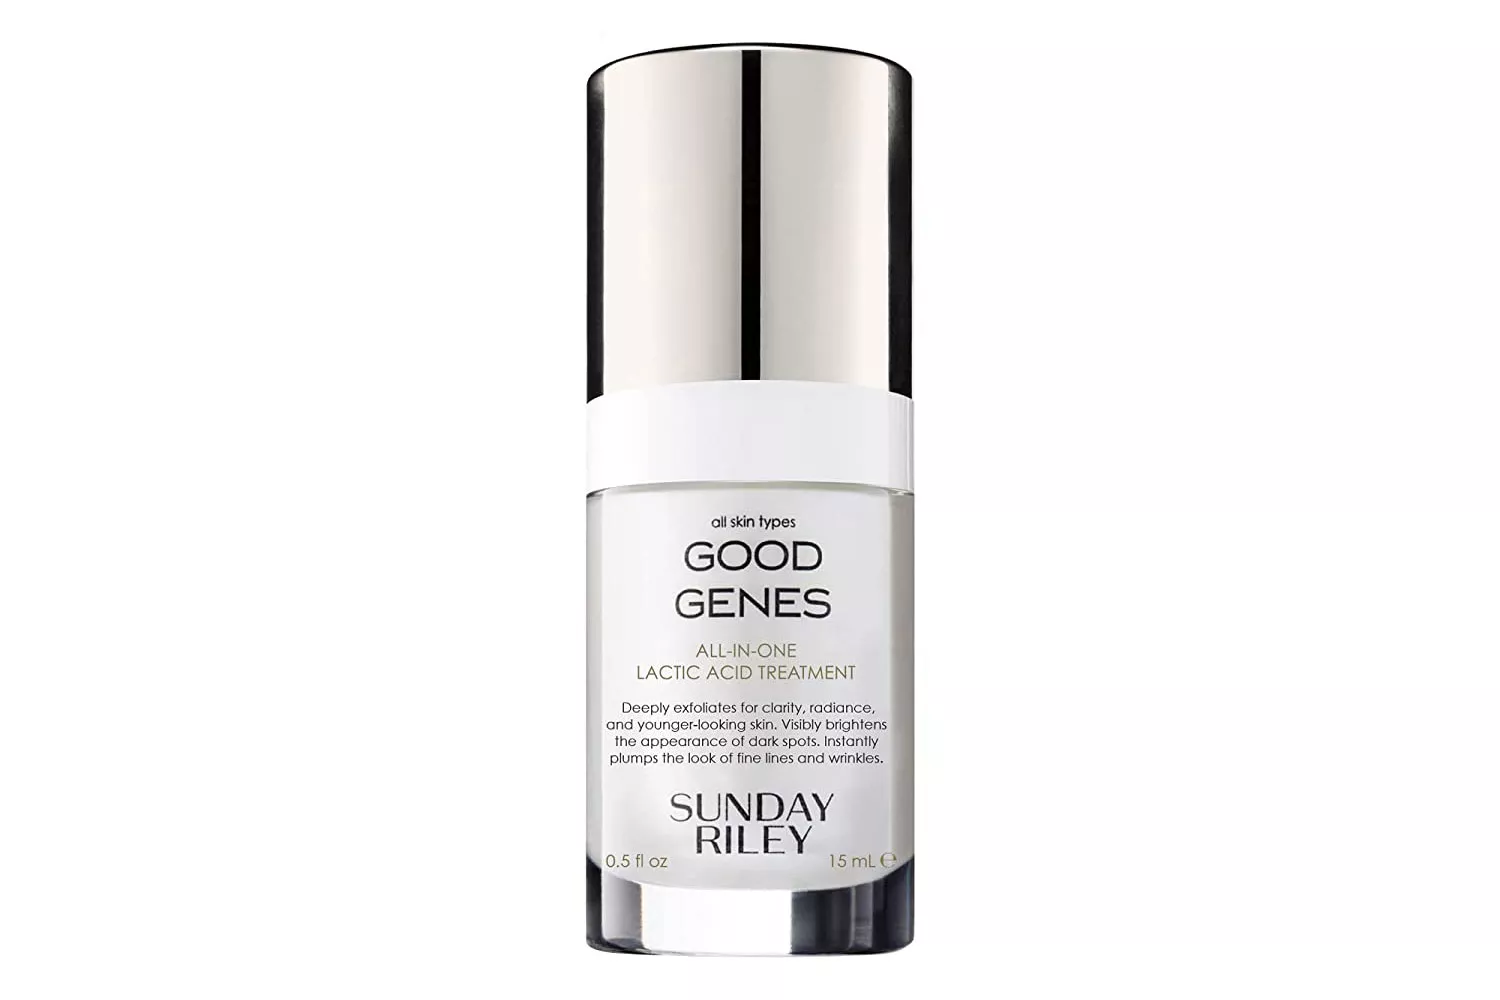 Amazon Prime Day Sunday Riley Good Genes All-in-One Lactic Acid Treatment Face Serum